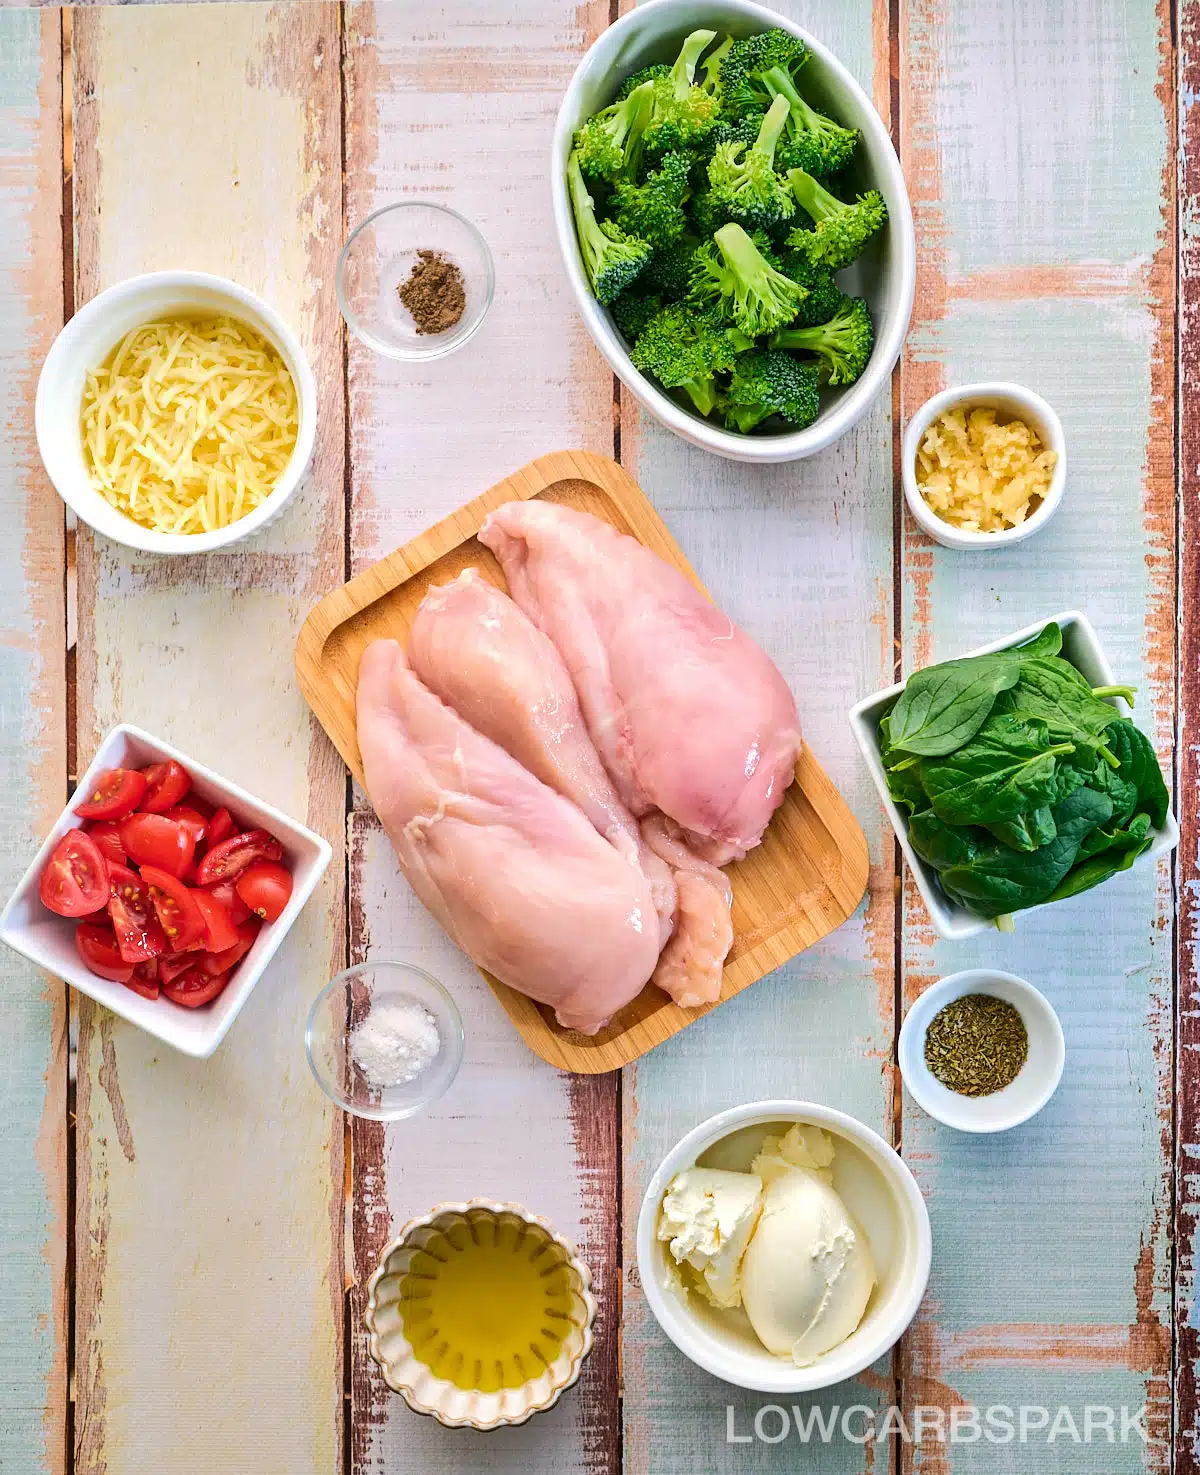 Garlic Chicken with Broccoli and Spinach Ingredients